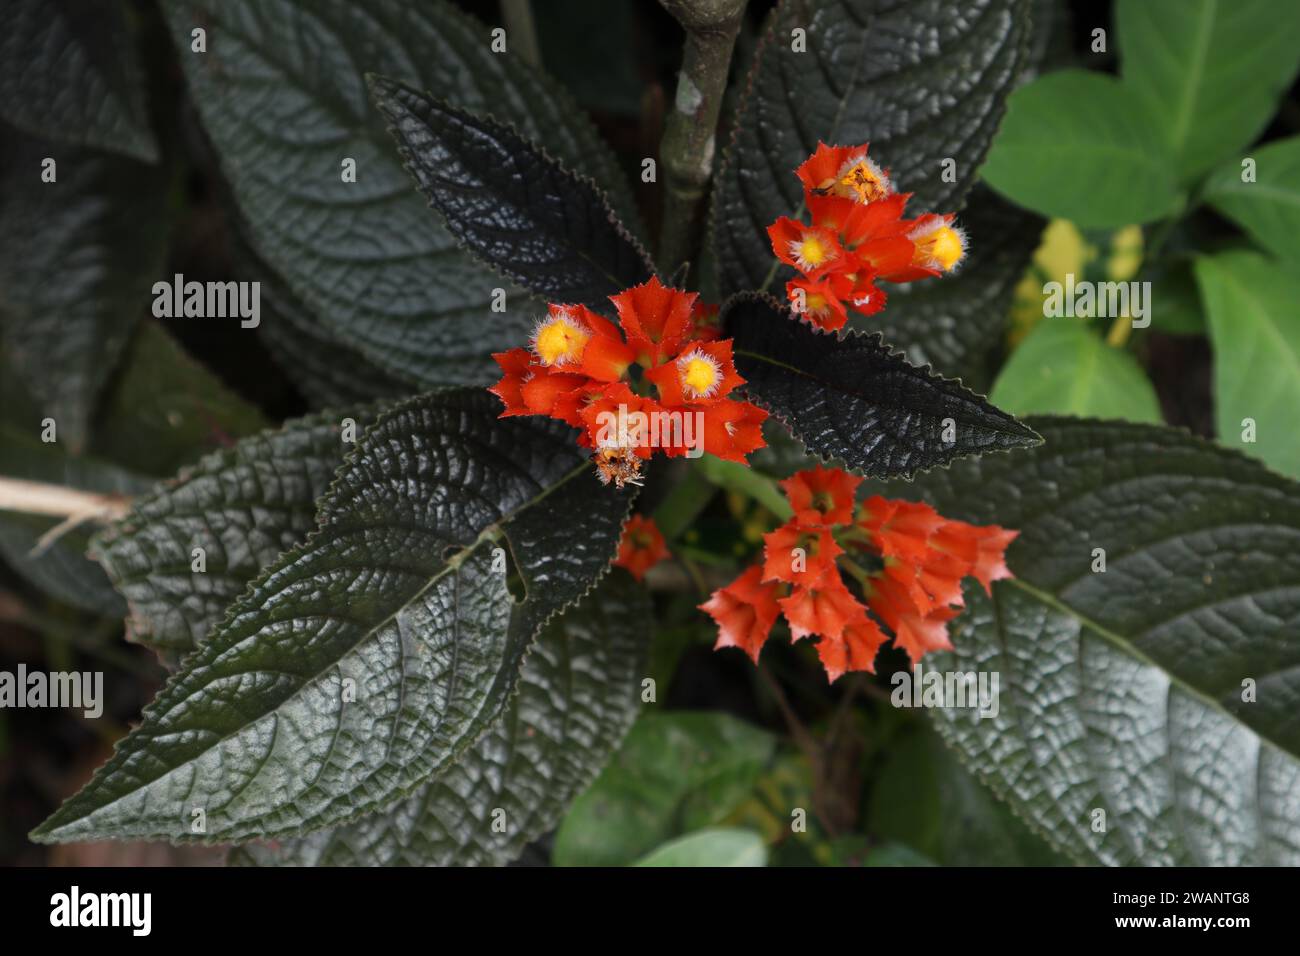 Overhead view of the yellow and orange colored flower clusters of a Black flamingo (Chrysothemis pulchella) ornamental garden plant Stock Photo